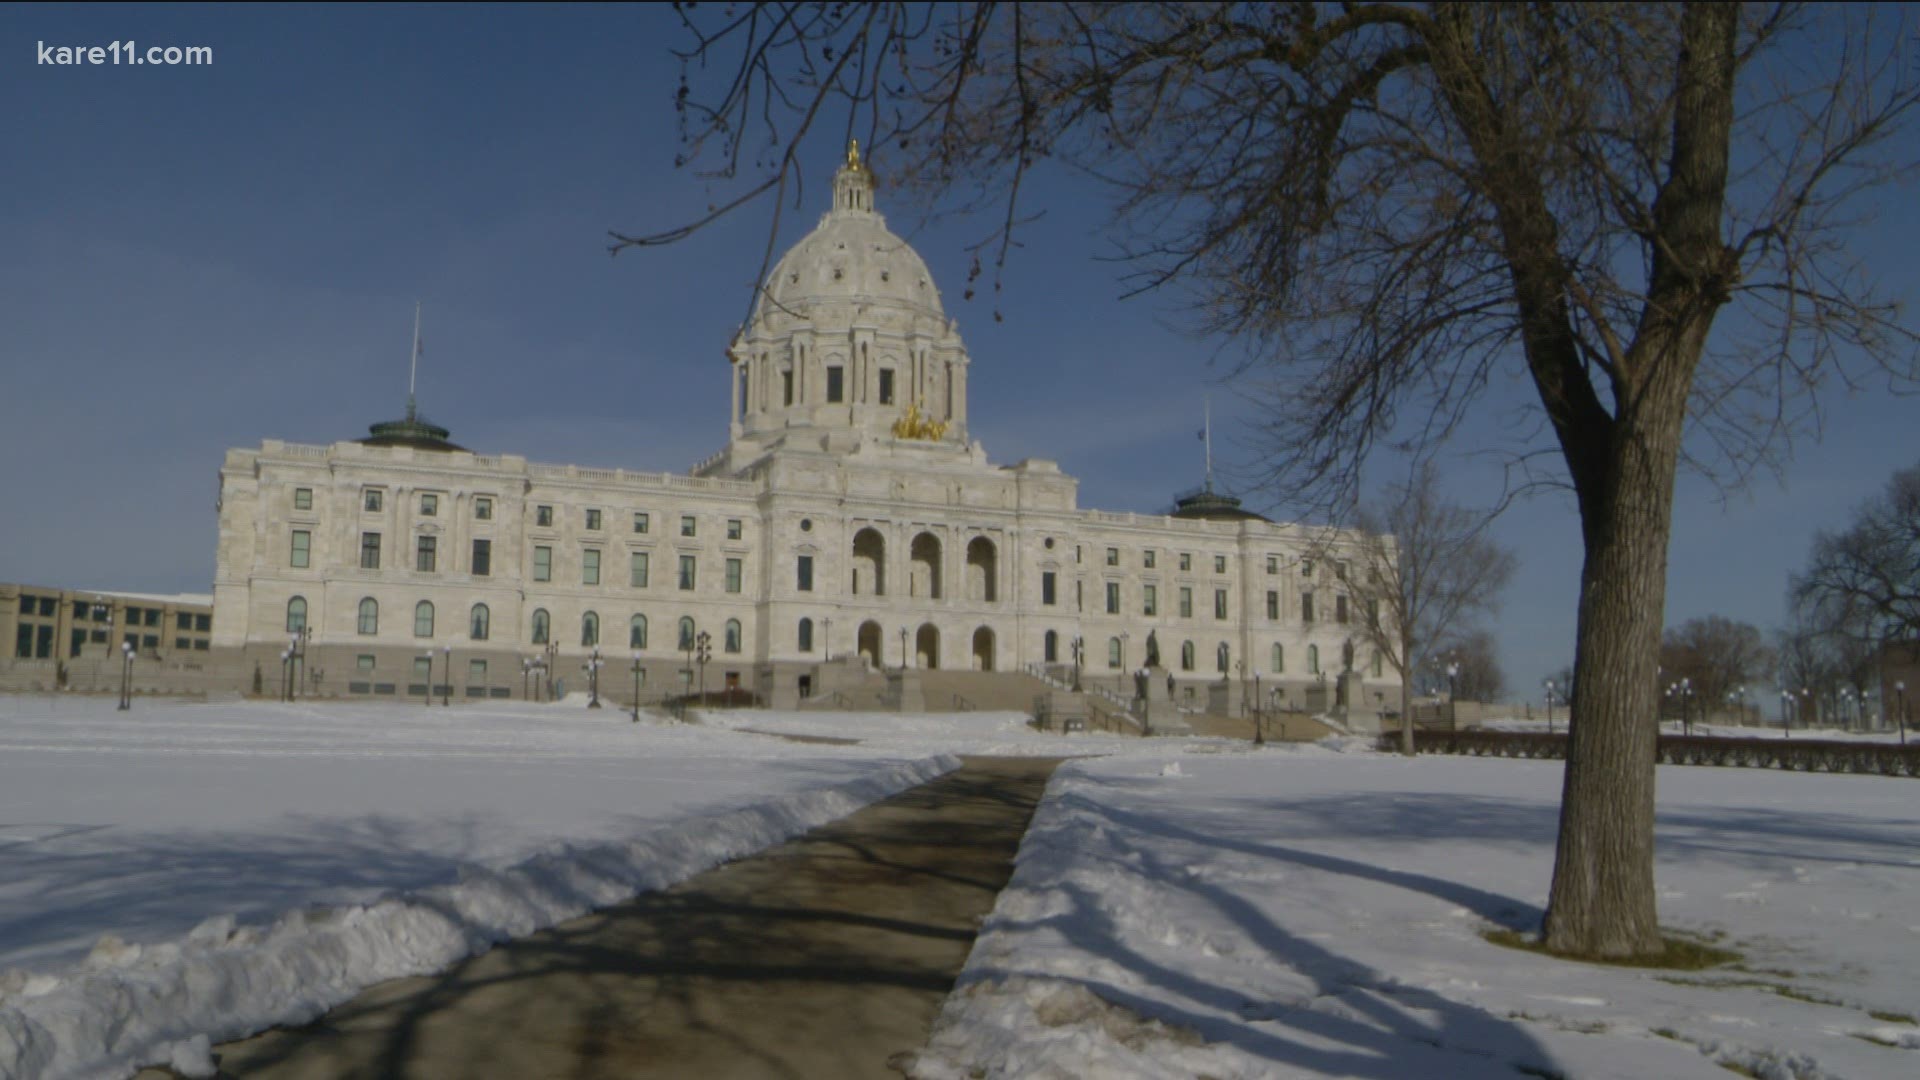 Walz to give update on security at Capitol before inauguration